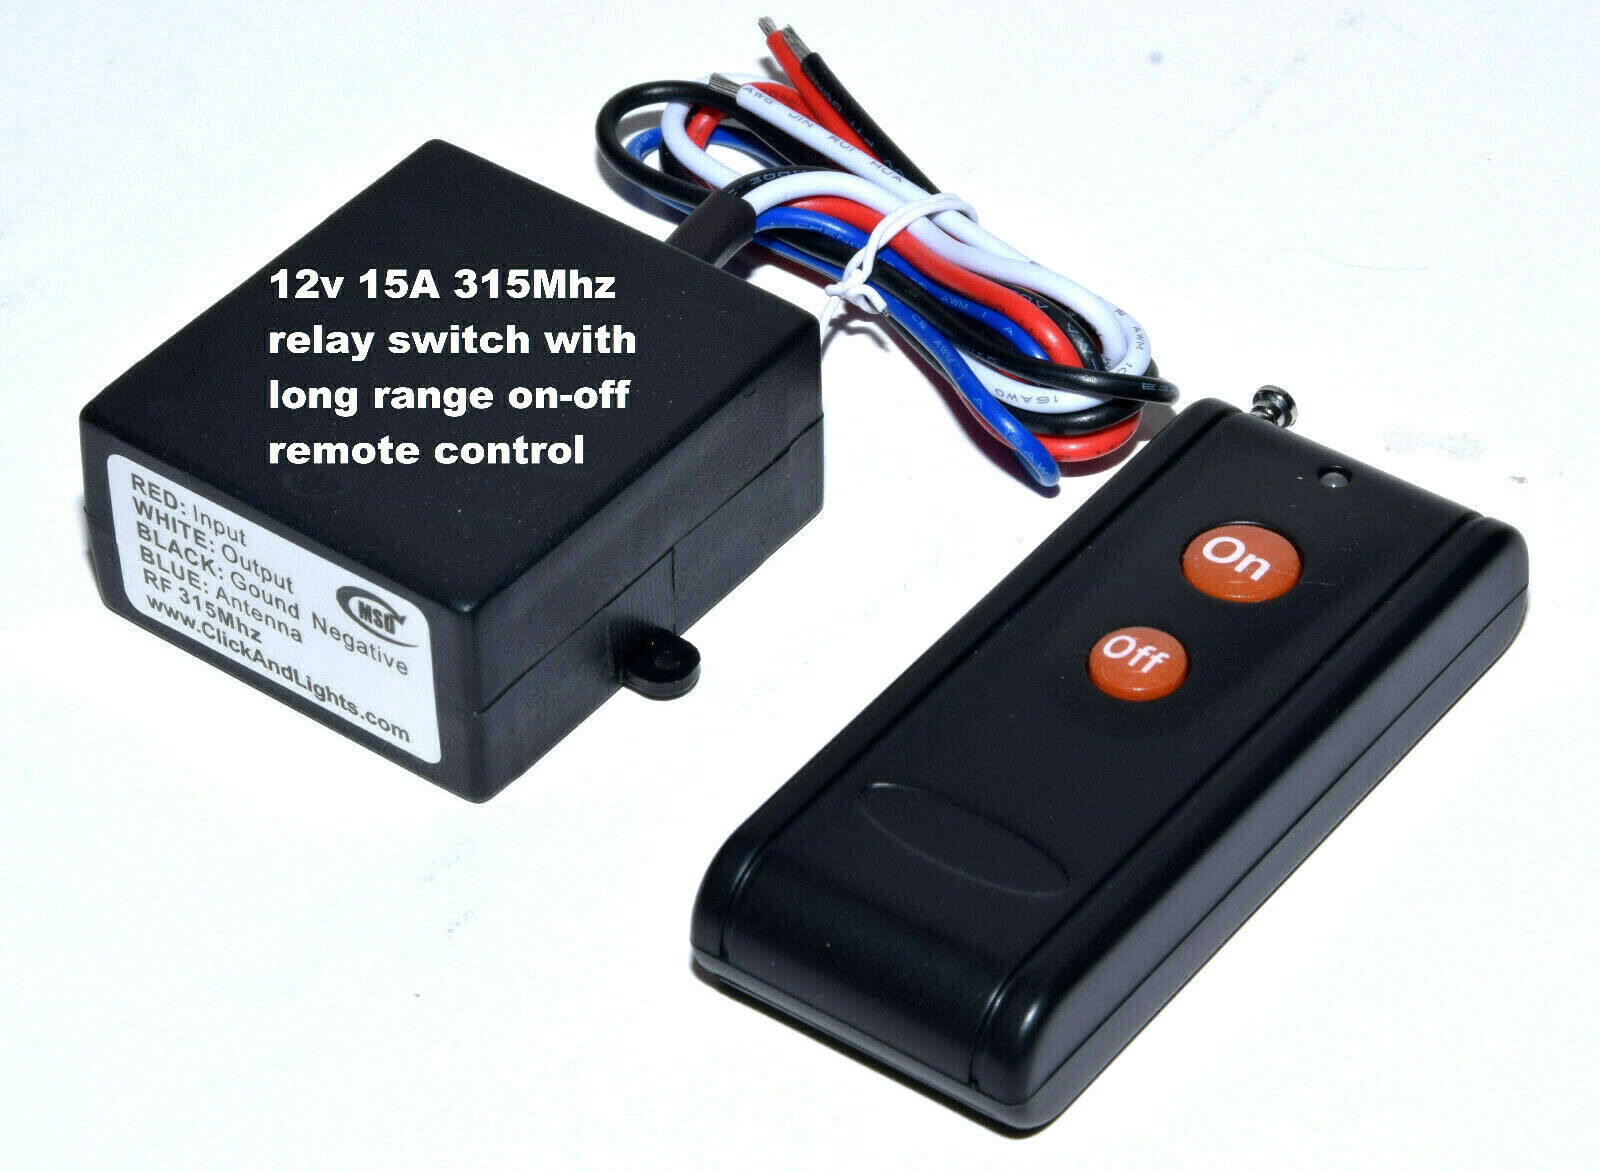 12v 15a Long Range Remote Control Switch Relay With 12v Output Rs101